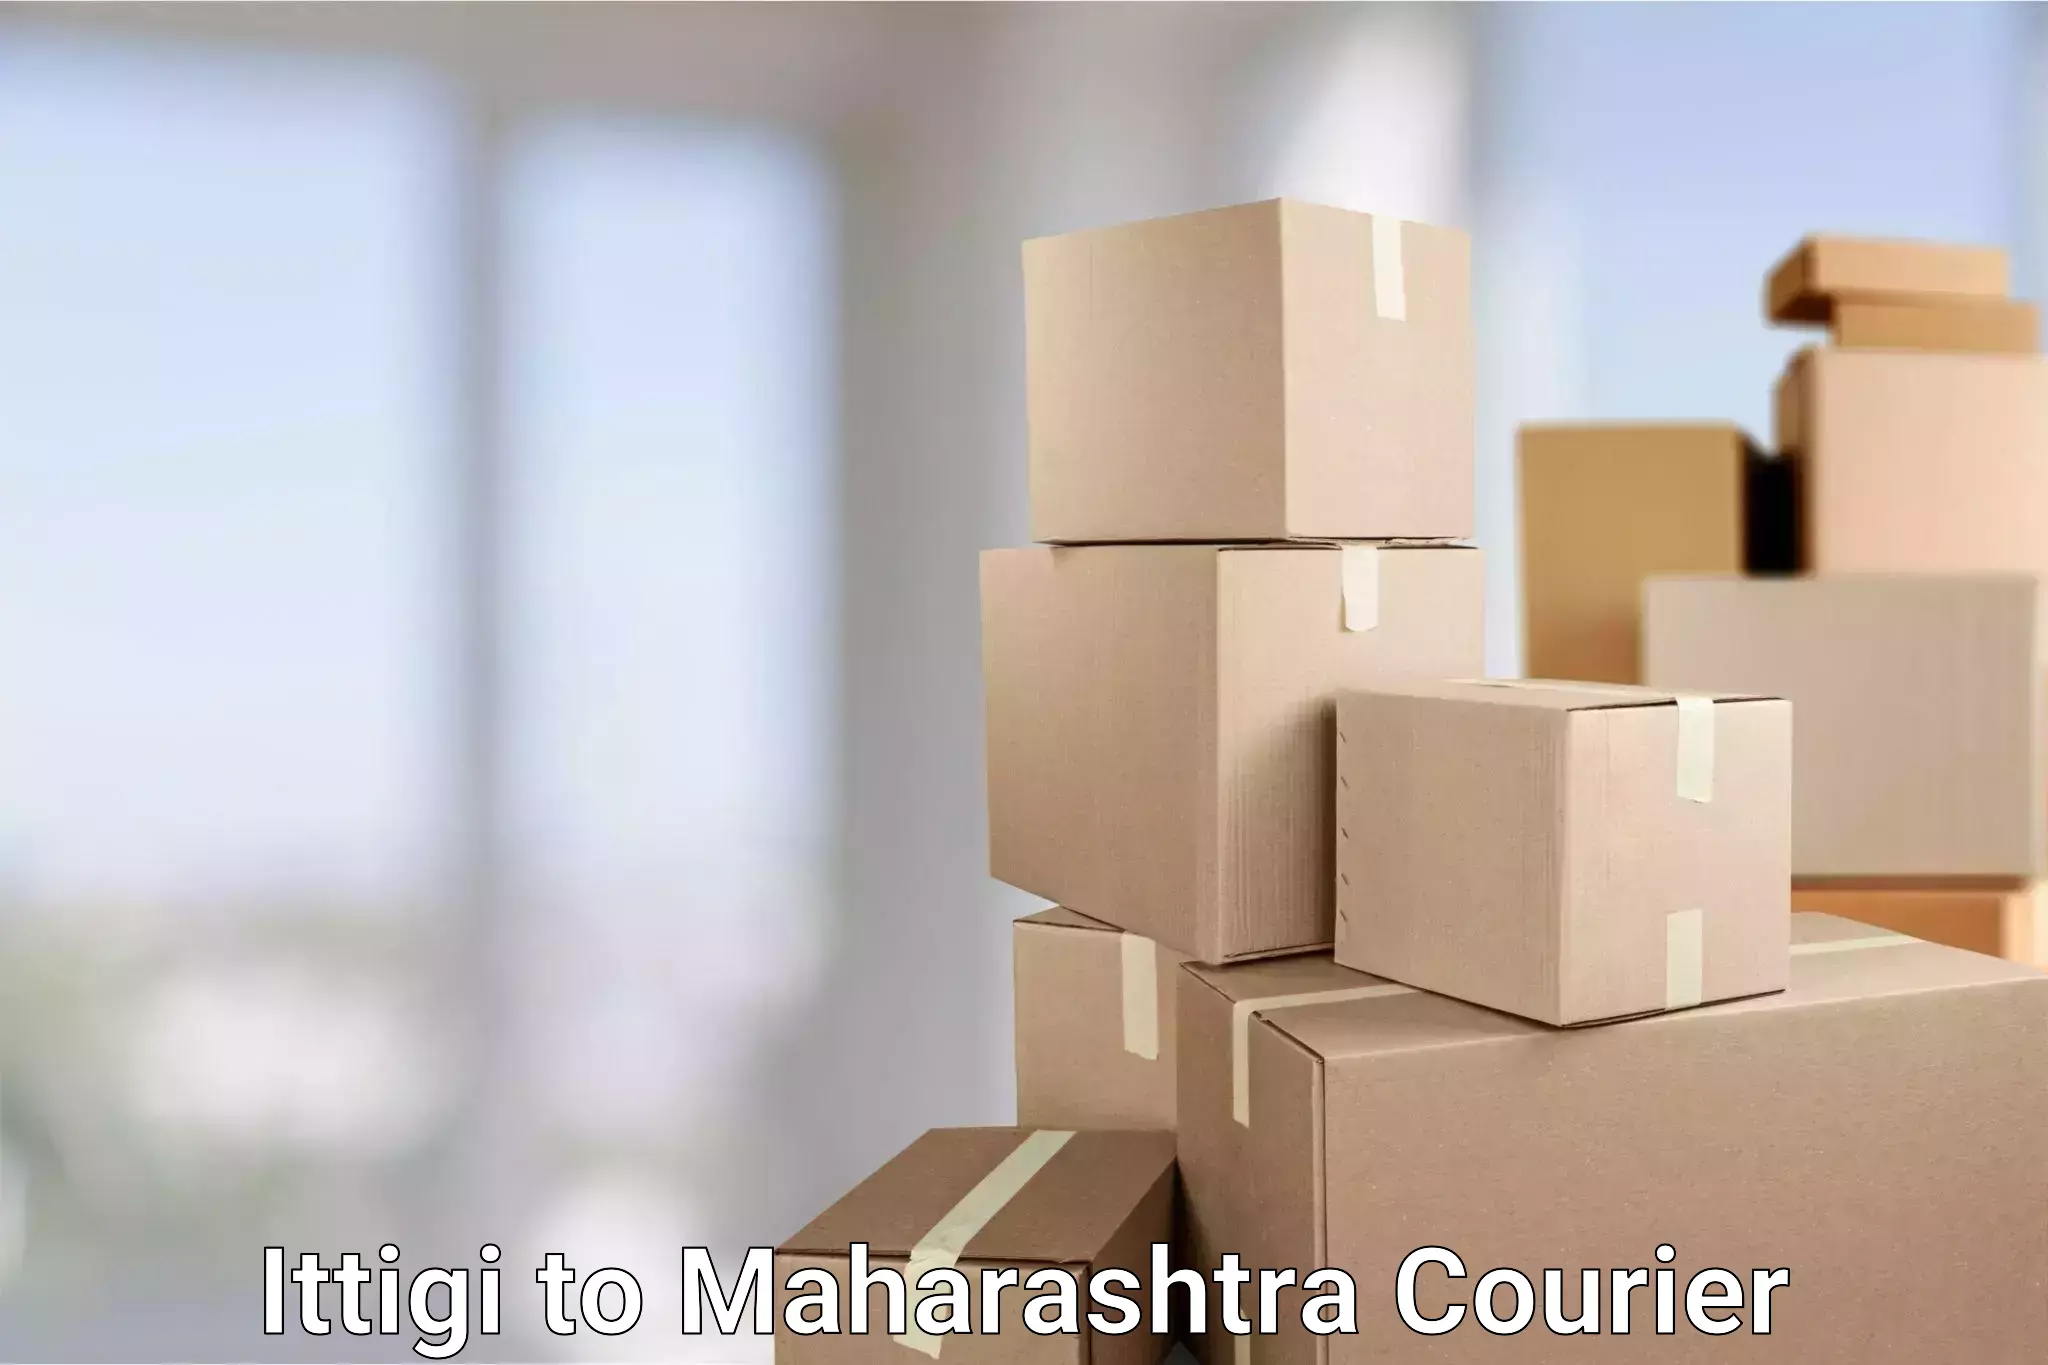 State-of-the-art courier technology Ittigi to Nanded